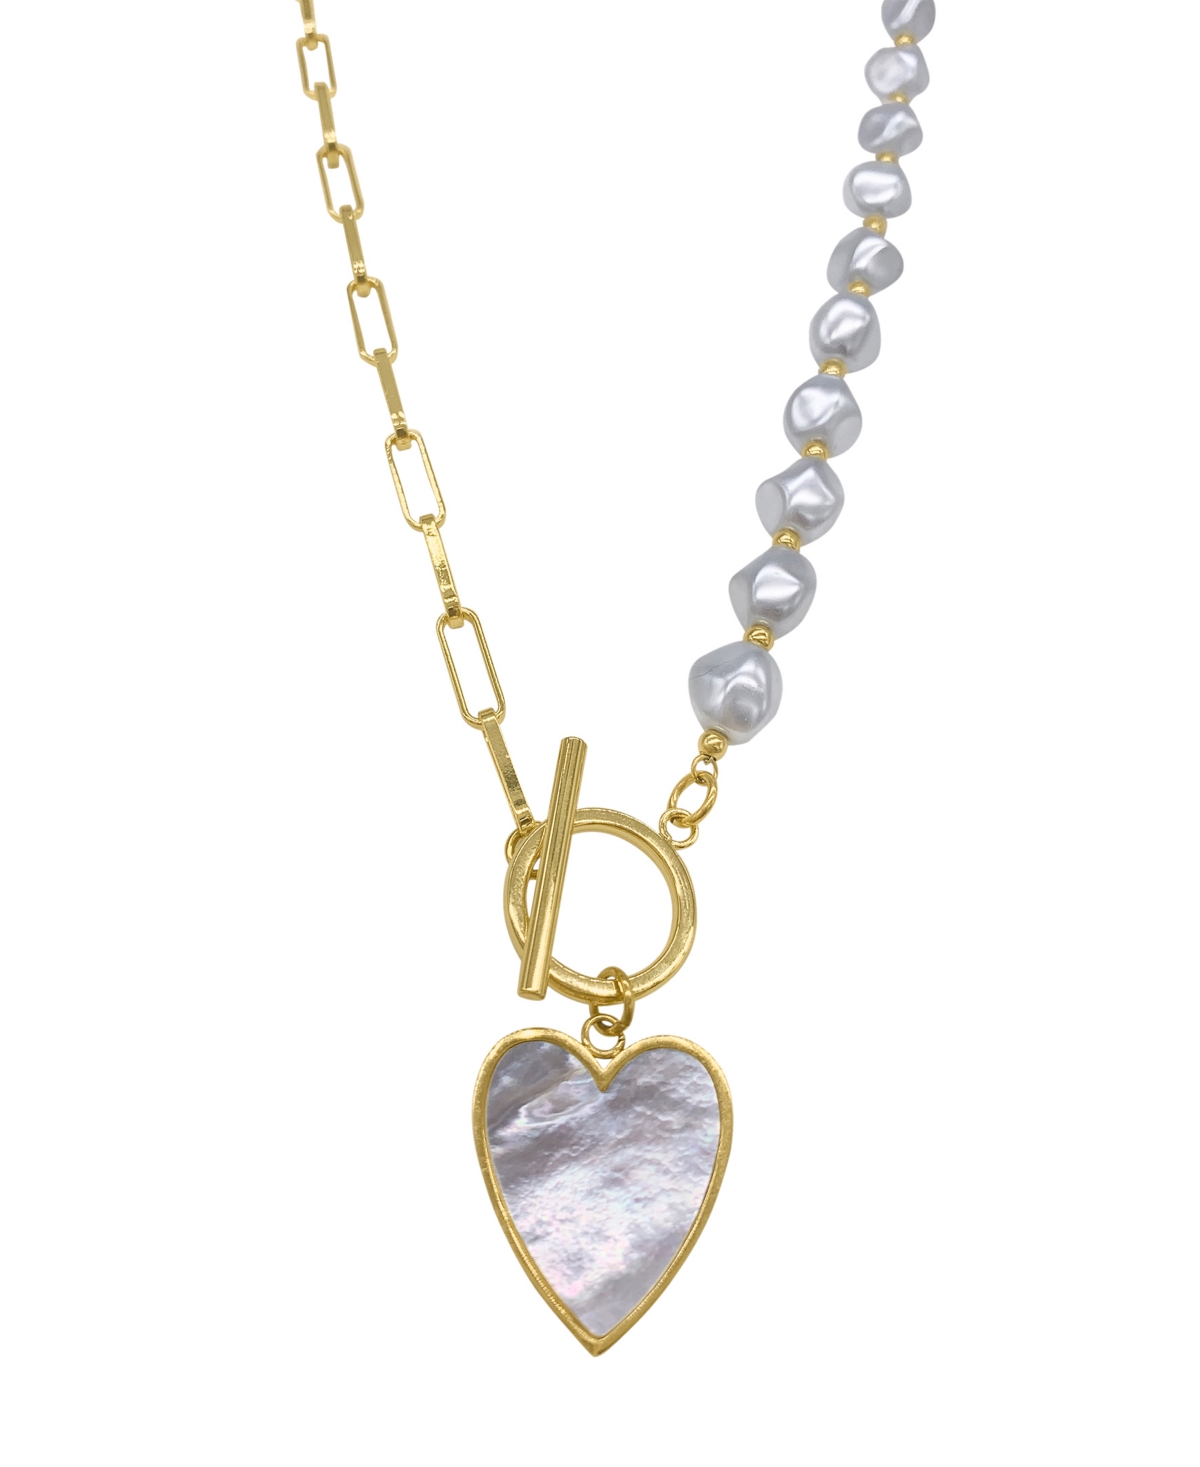 Imitation Pearl and Chain Heart Toggle Necklace - Yellow Gold-Tone, White